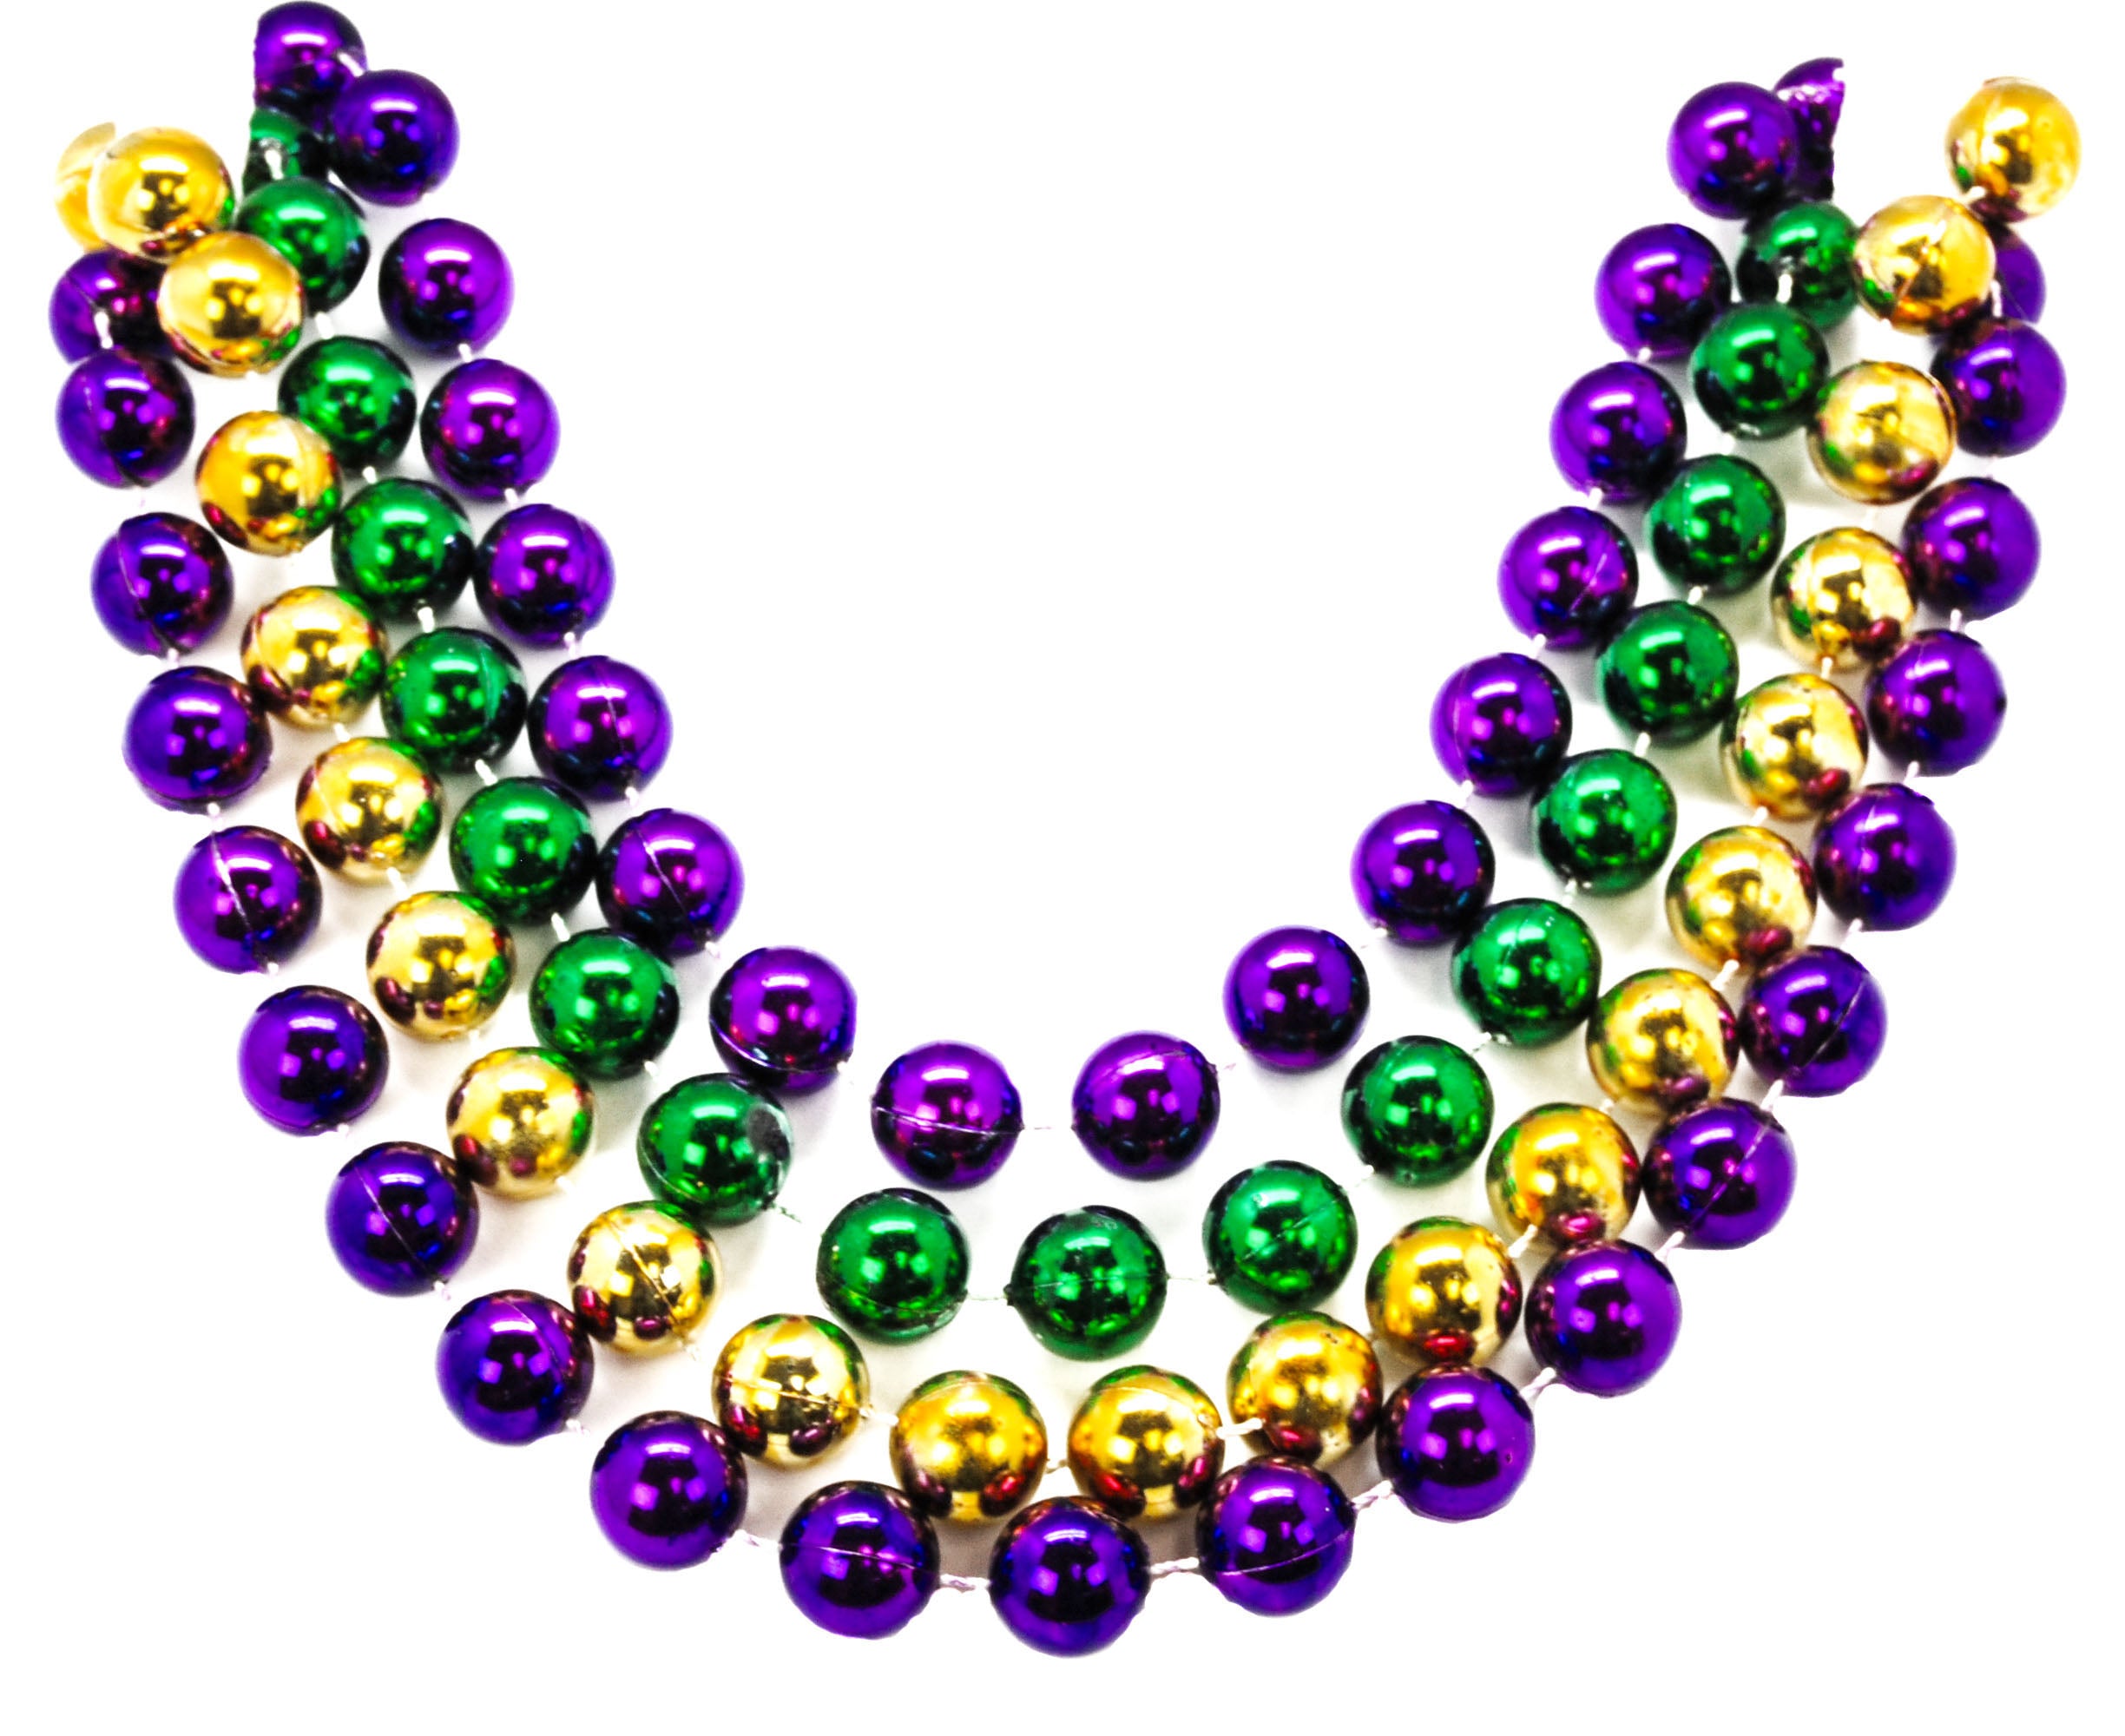 100" 18mm Round Beads Purple, Green, and Gold